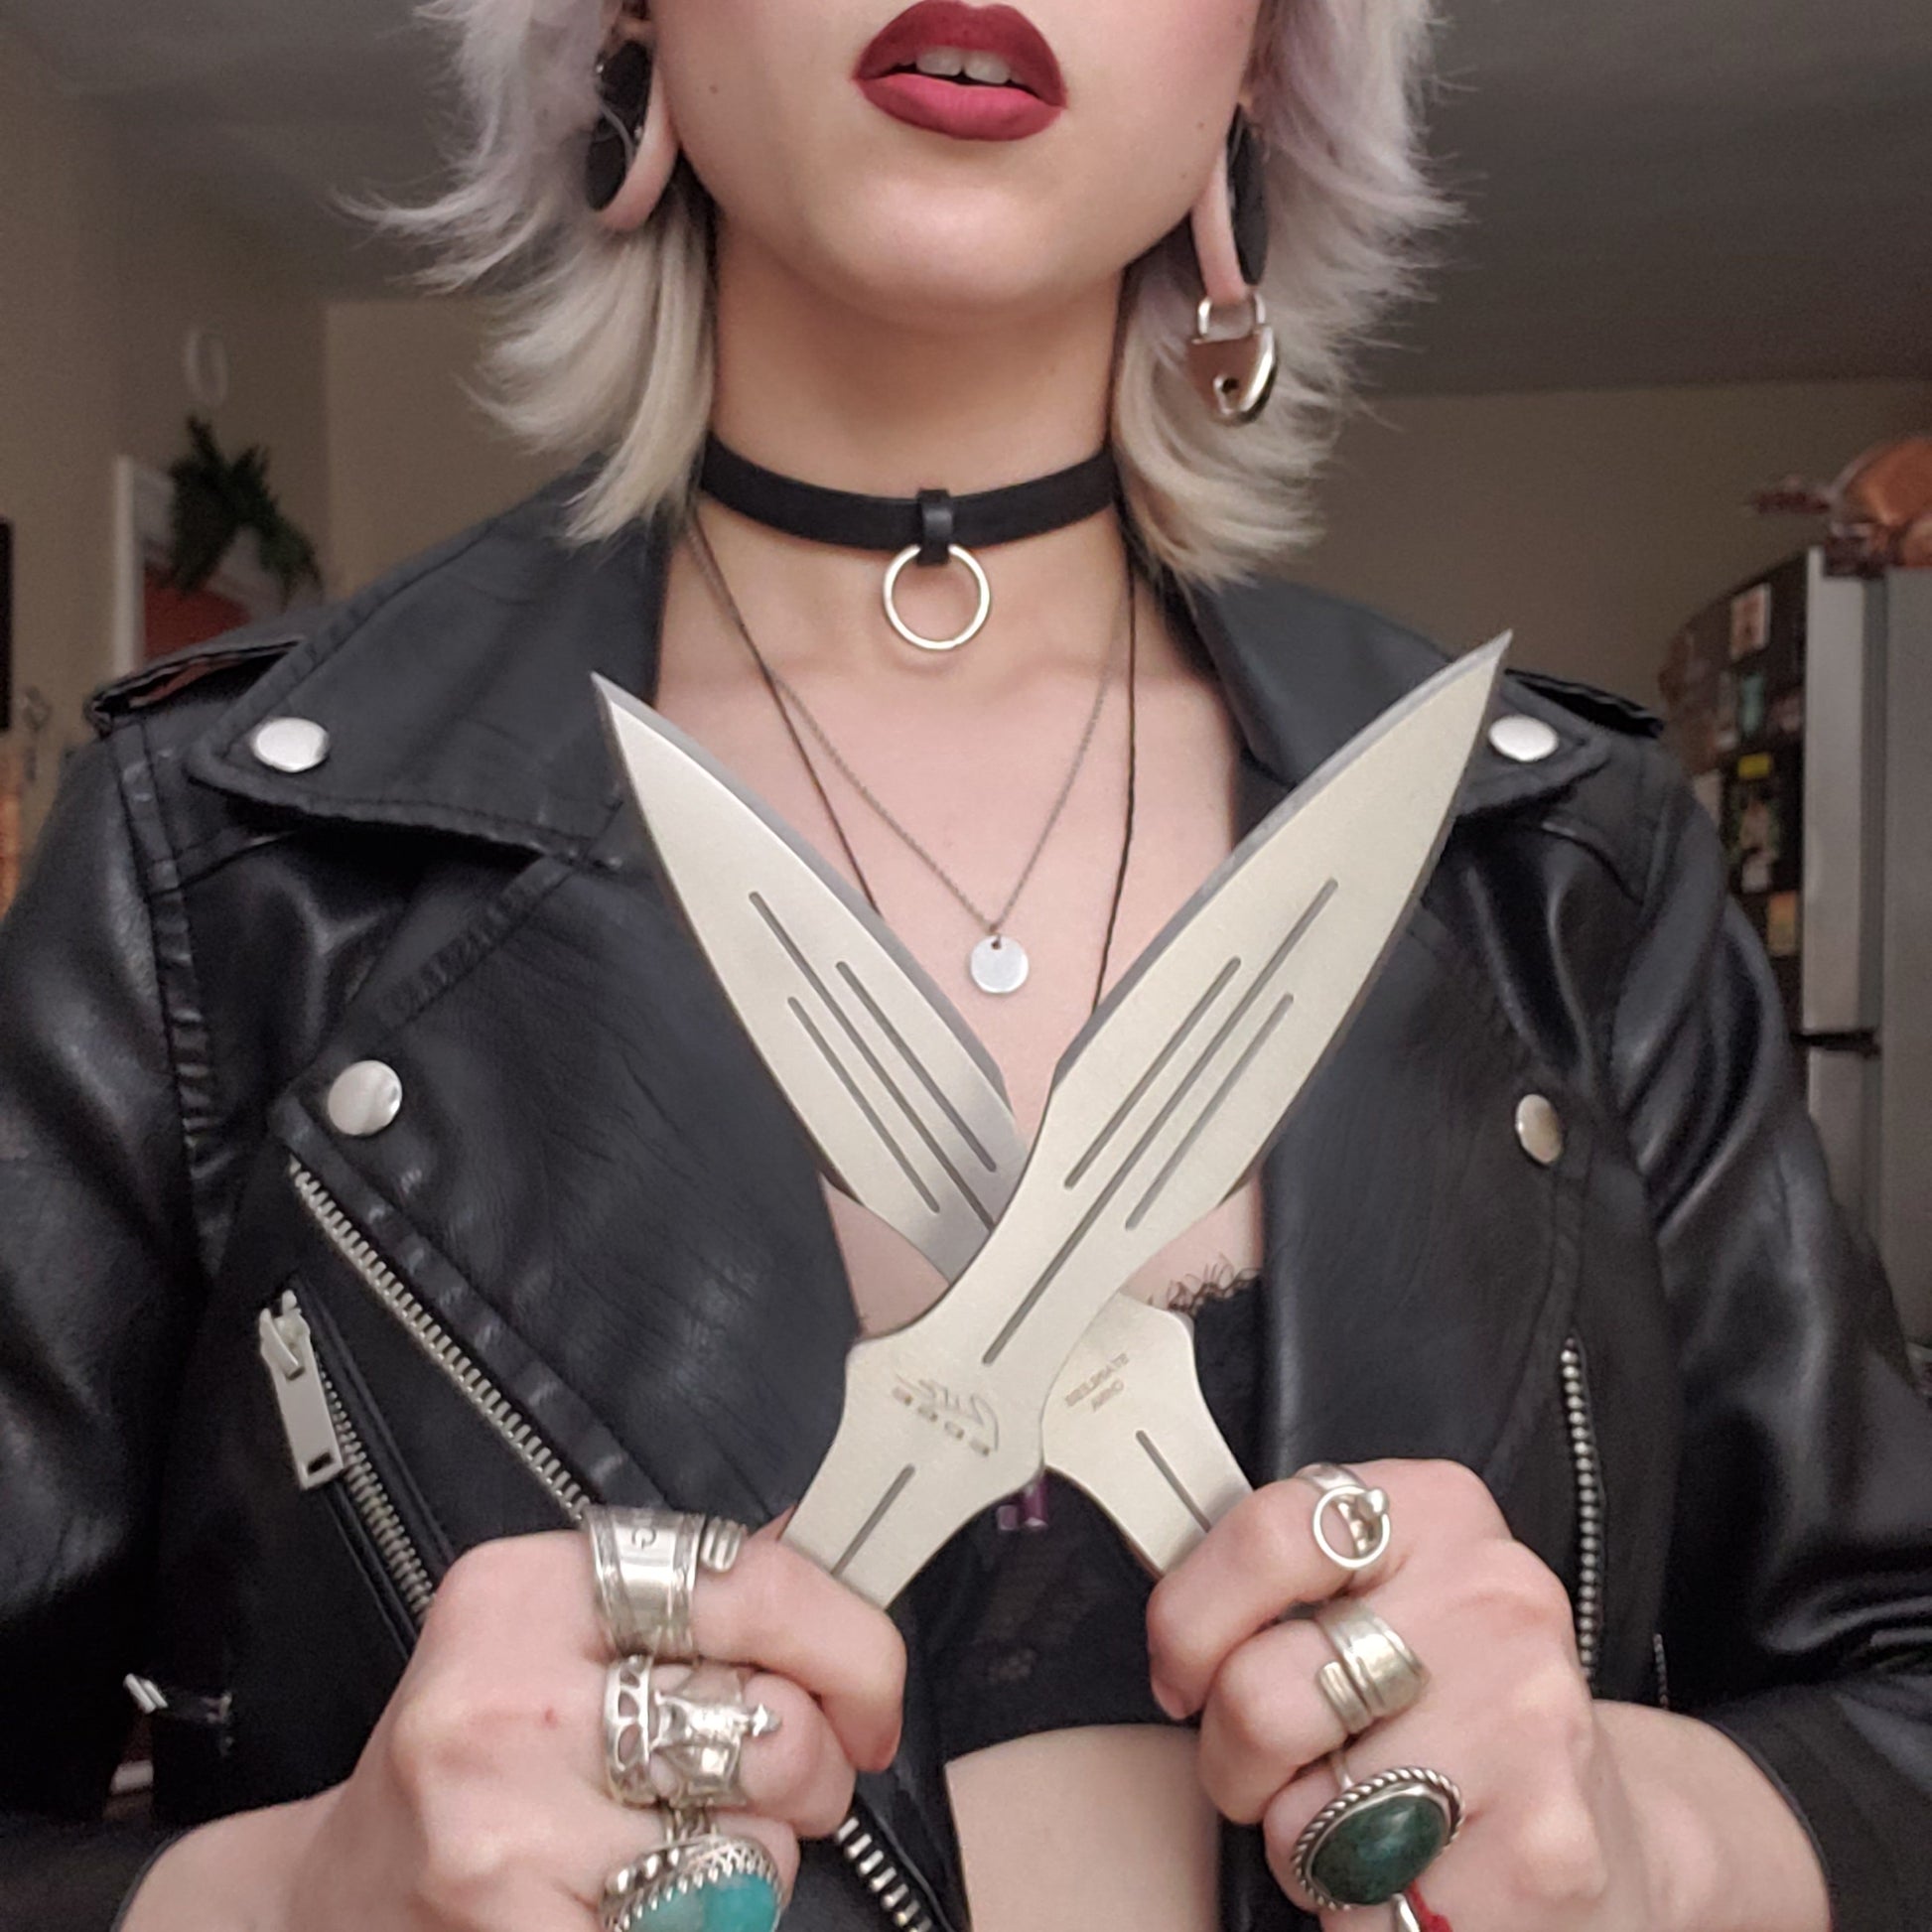 A model wearing a leather jacket holding up  two of the silver colored knives from the Pro Quality 3 Piece Throwing Knife Set.